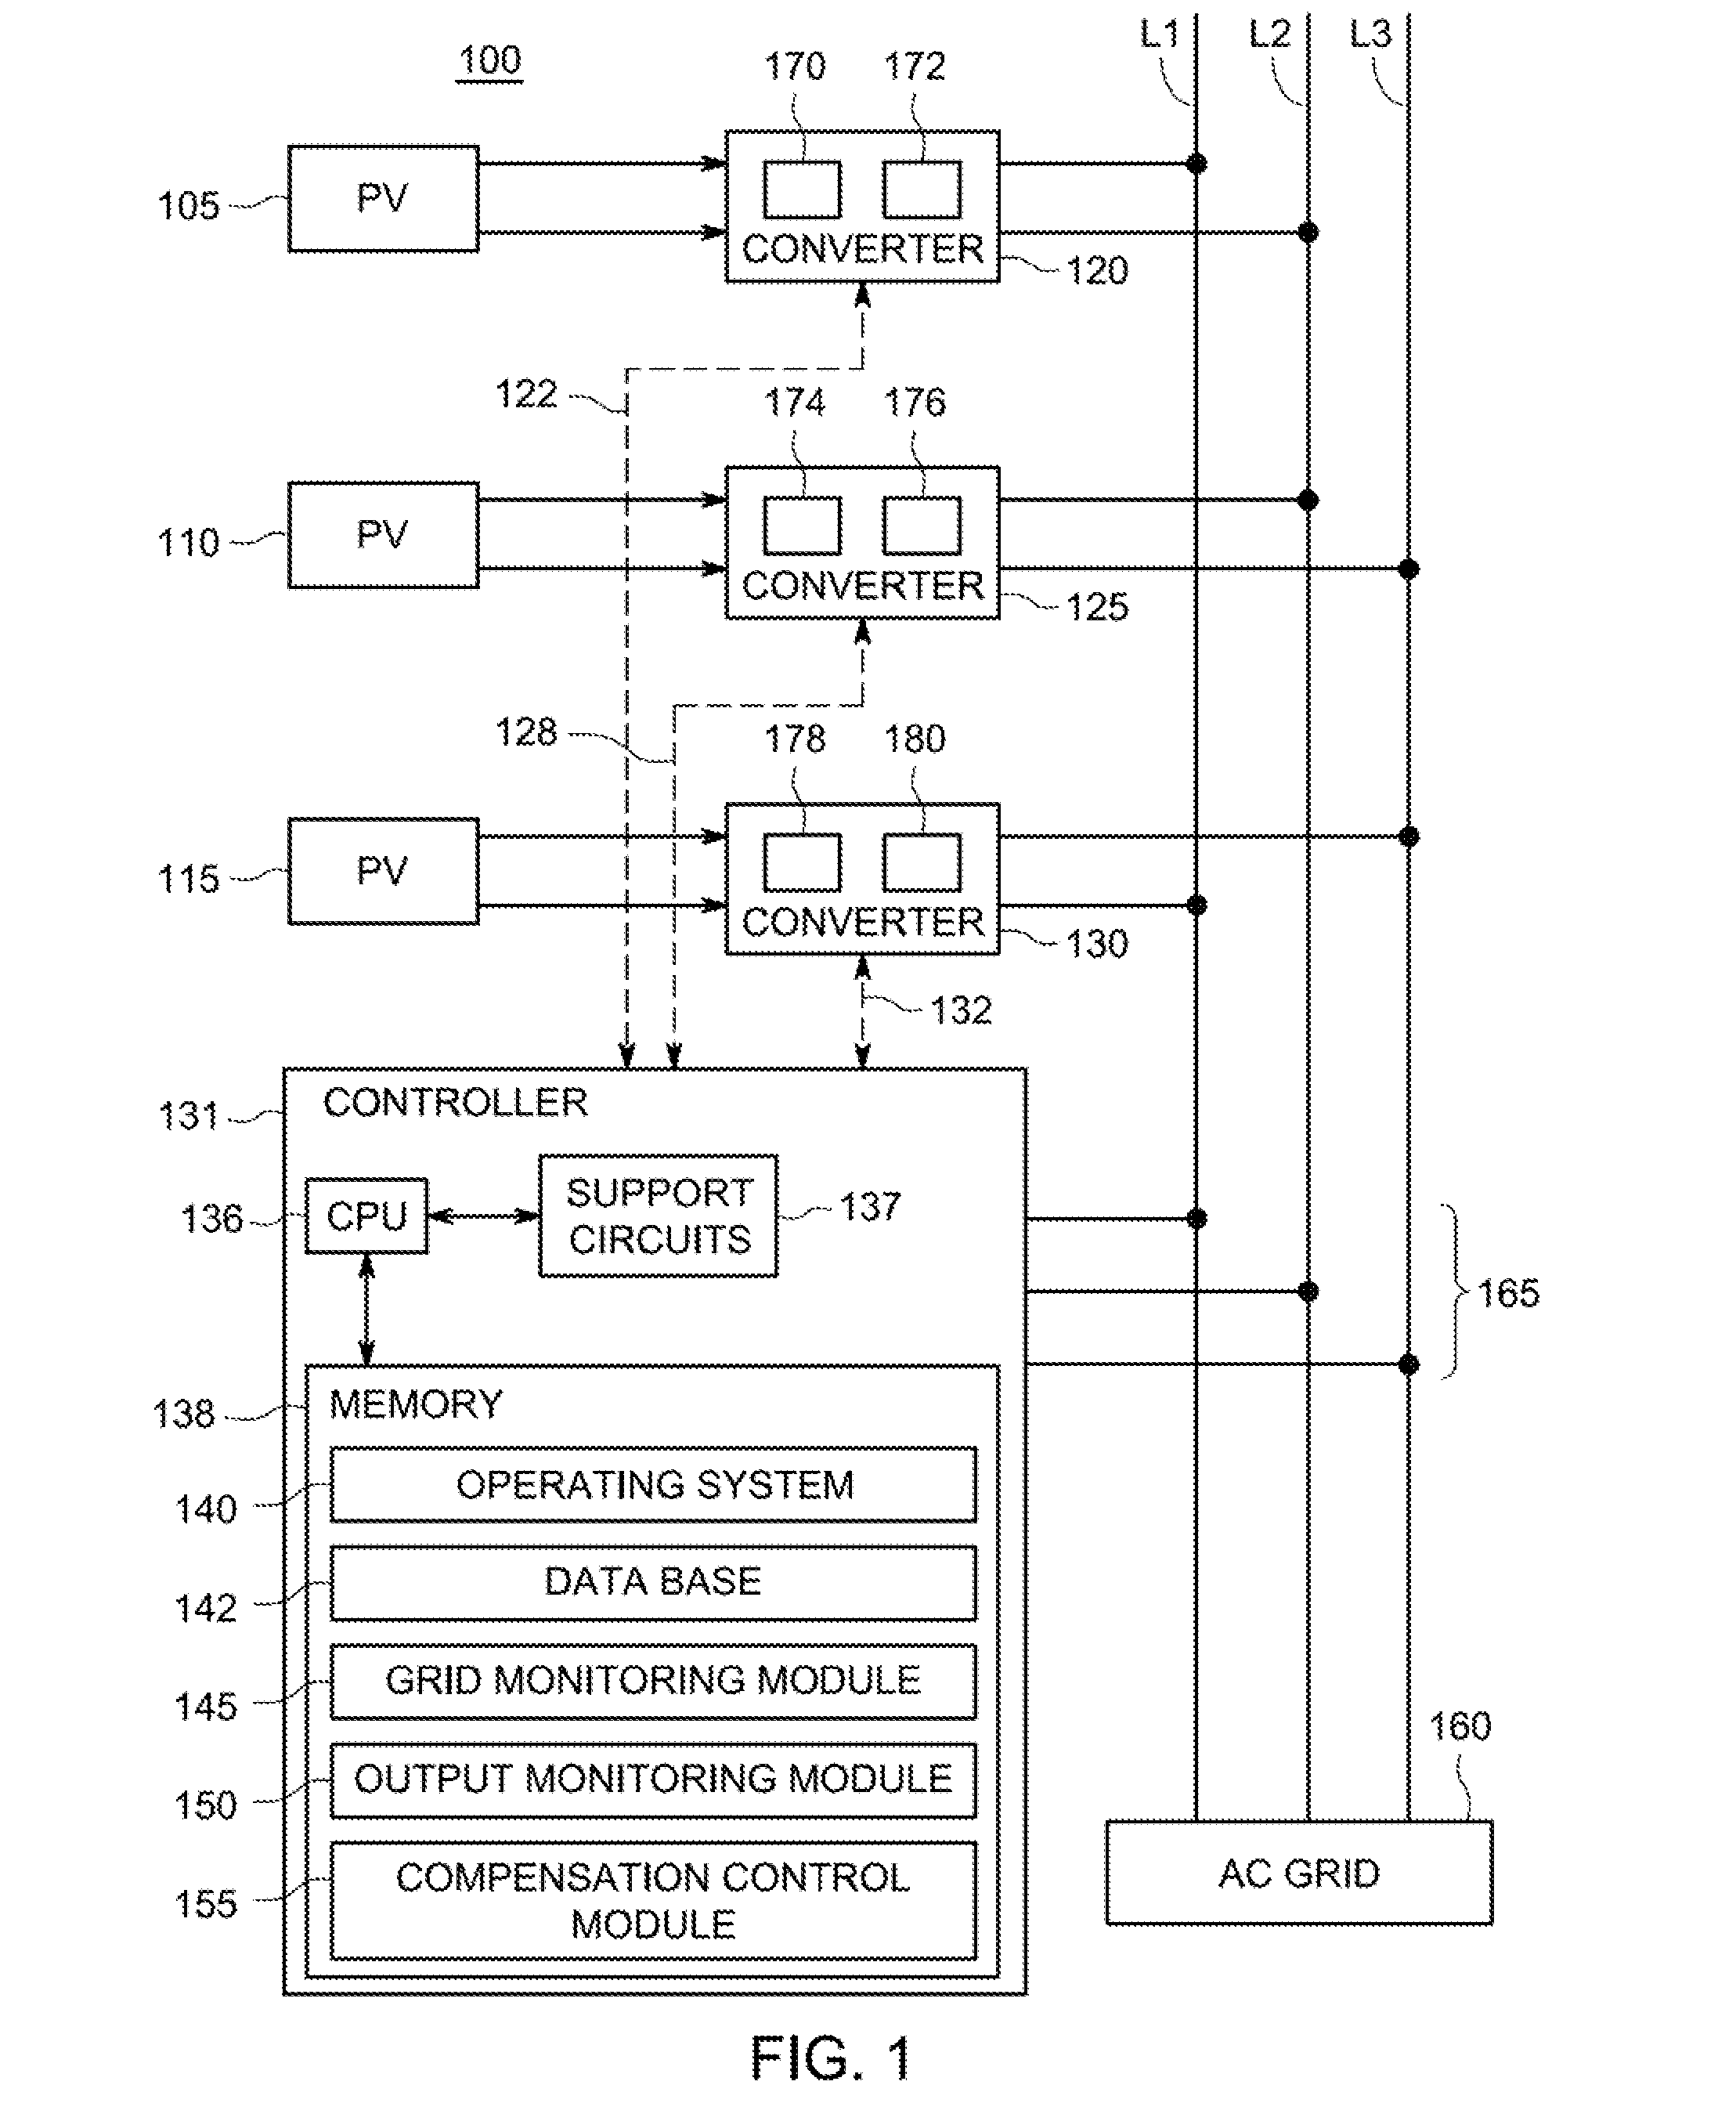 Method and apparatus for power imbalance correction in a multi-phase power generator